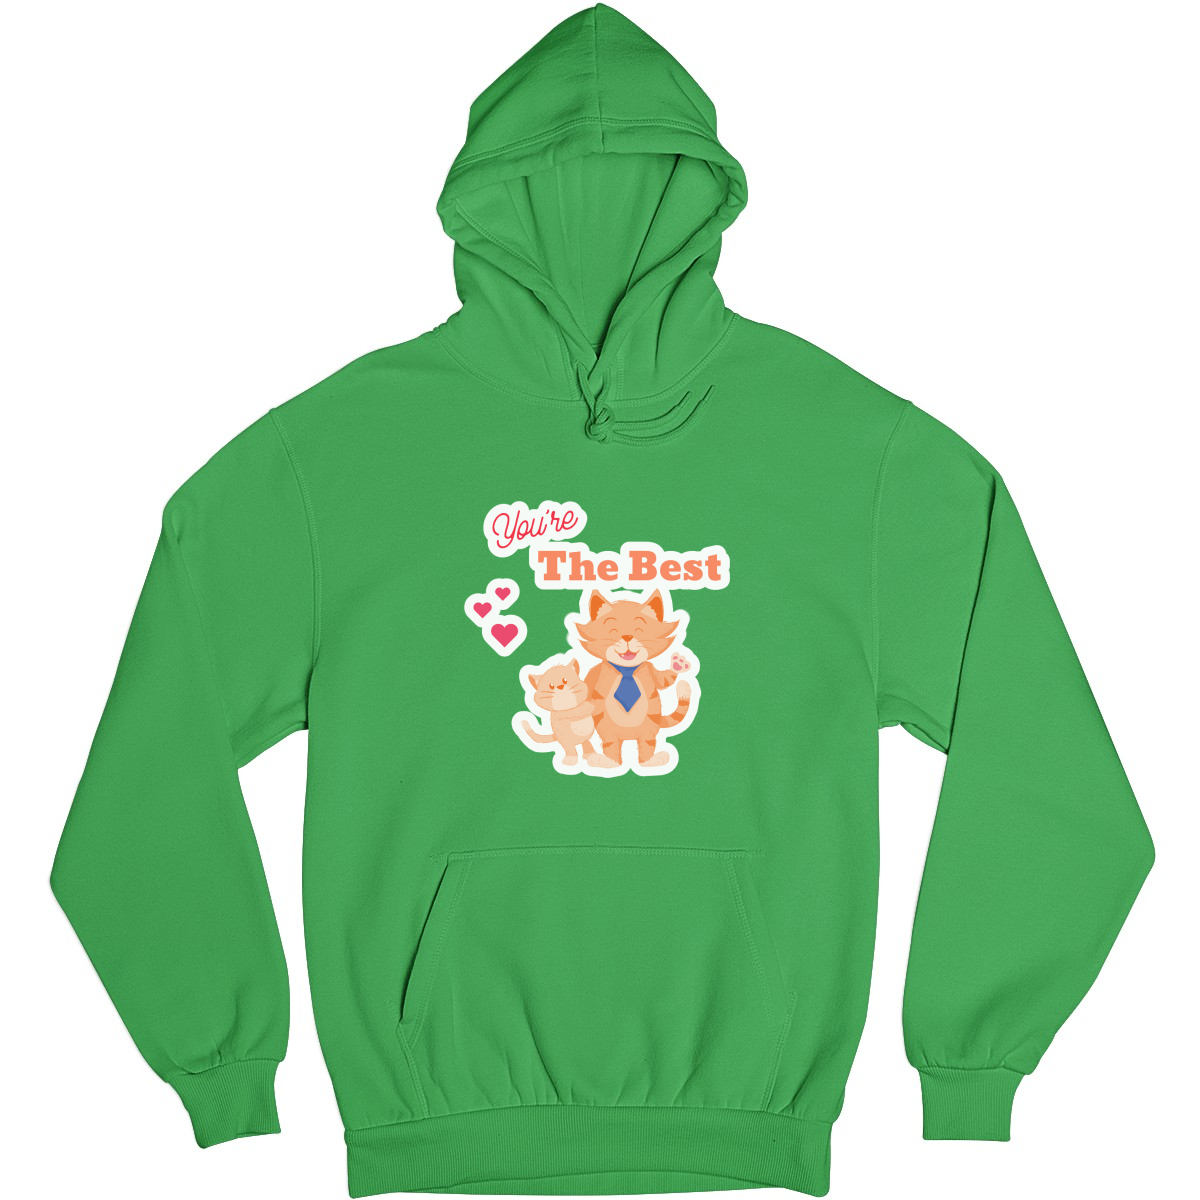 You are the best Unisex Hoodie | Green